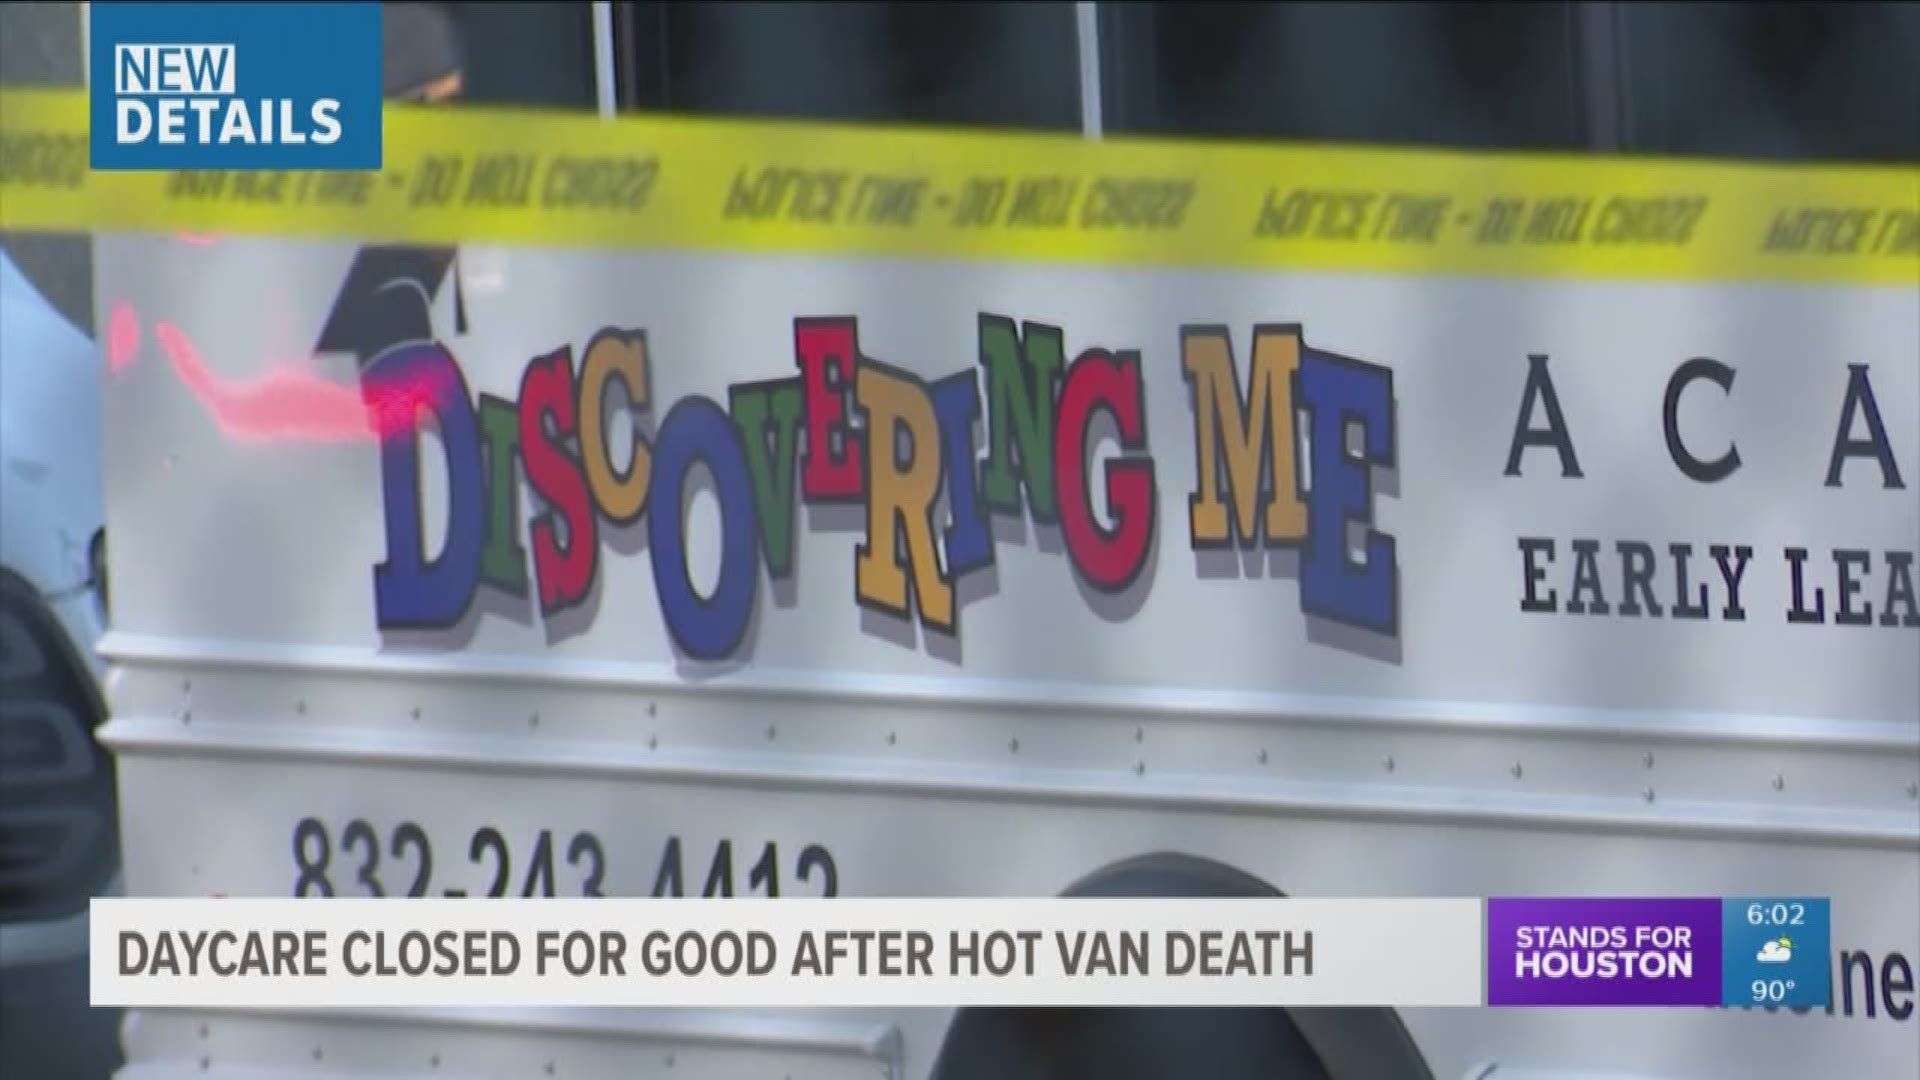 The Houston day care where a toddler died after being left in a hot van has been ordered to close.